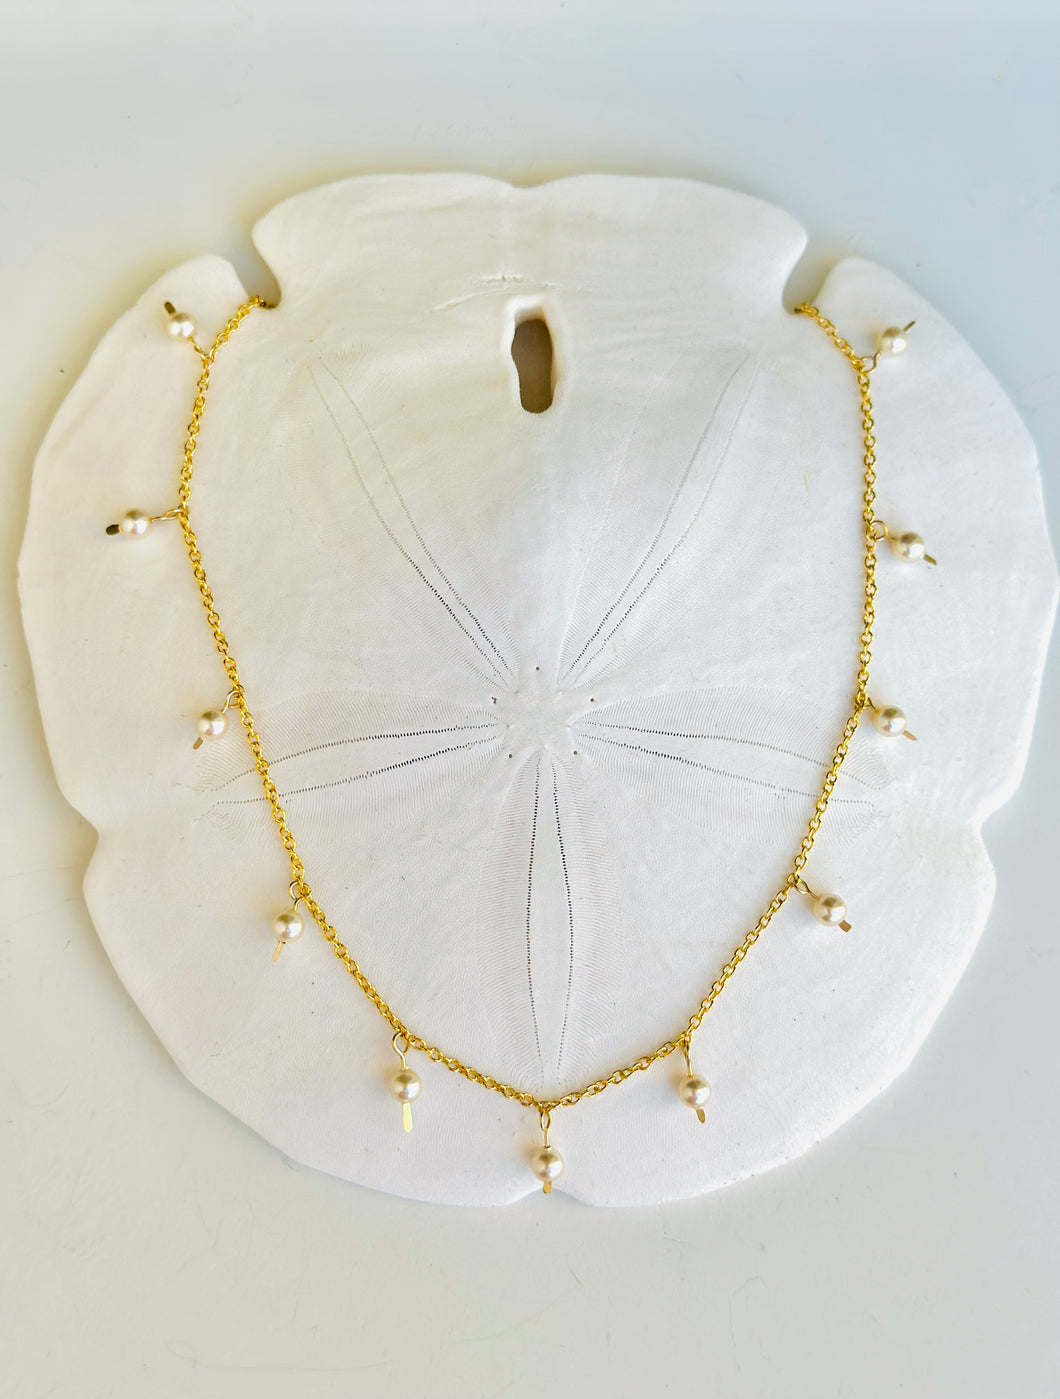 The Lizy Necklace